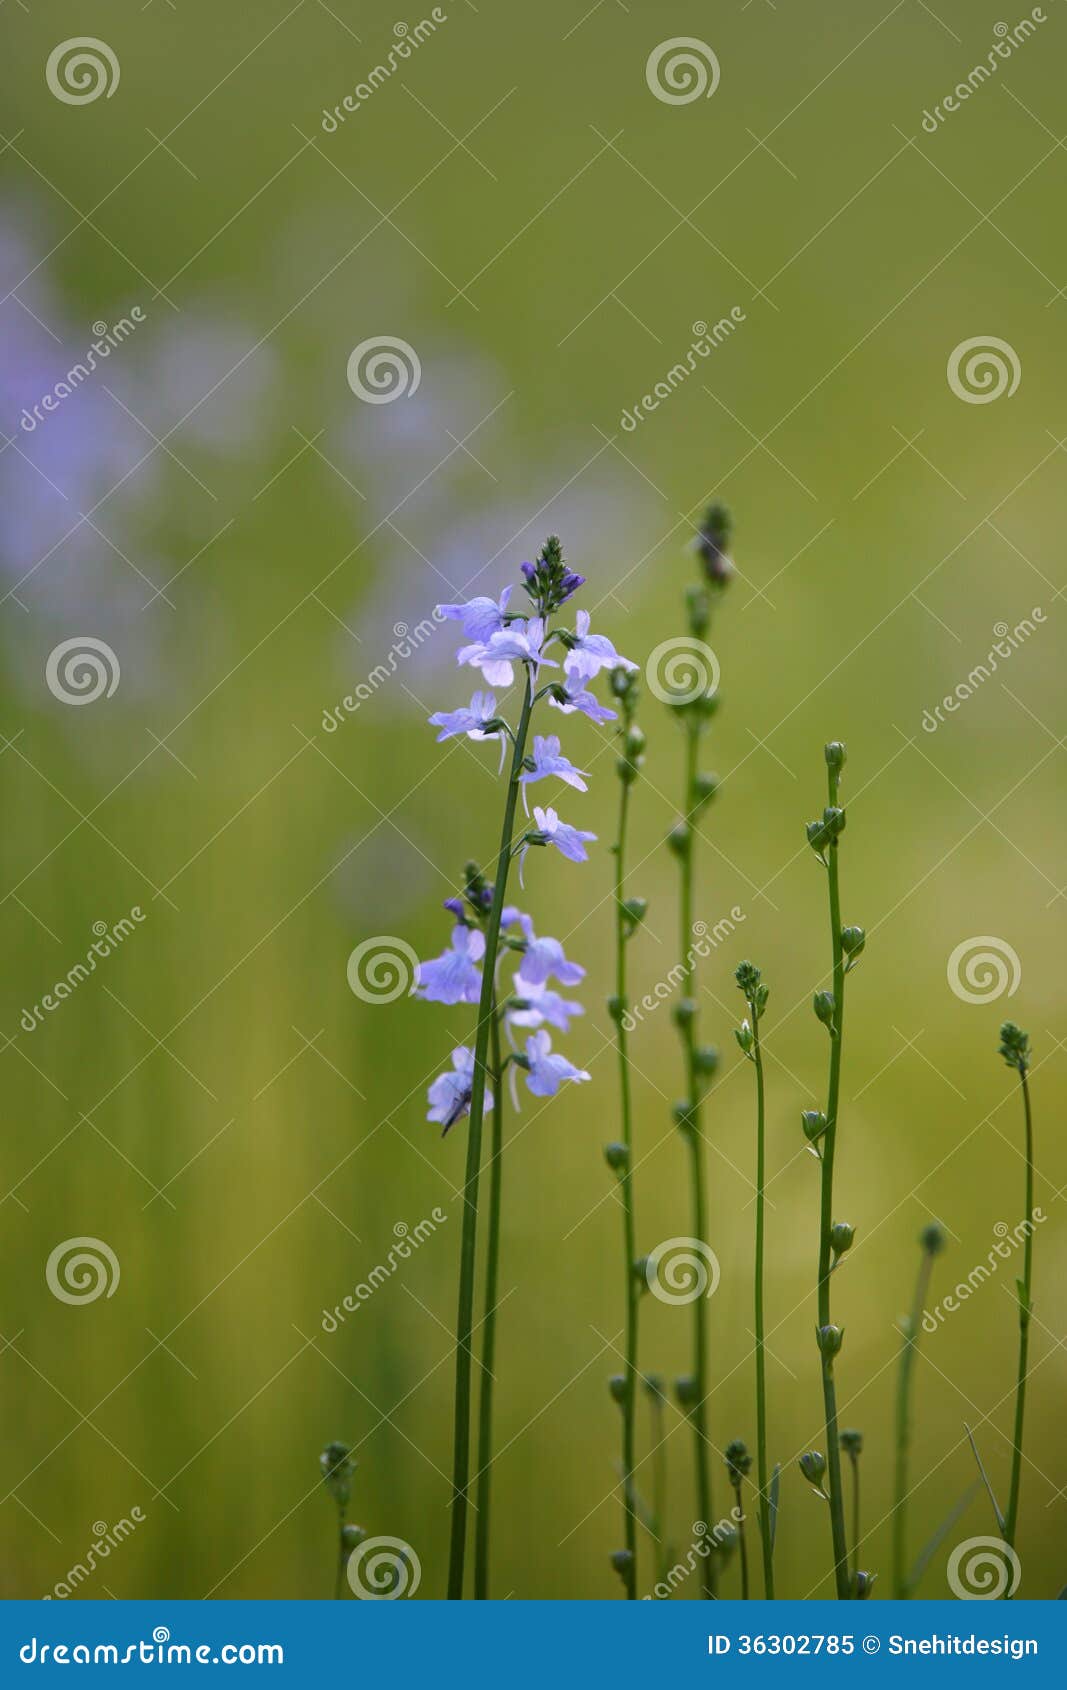 small purple flowers in grass